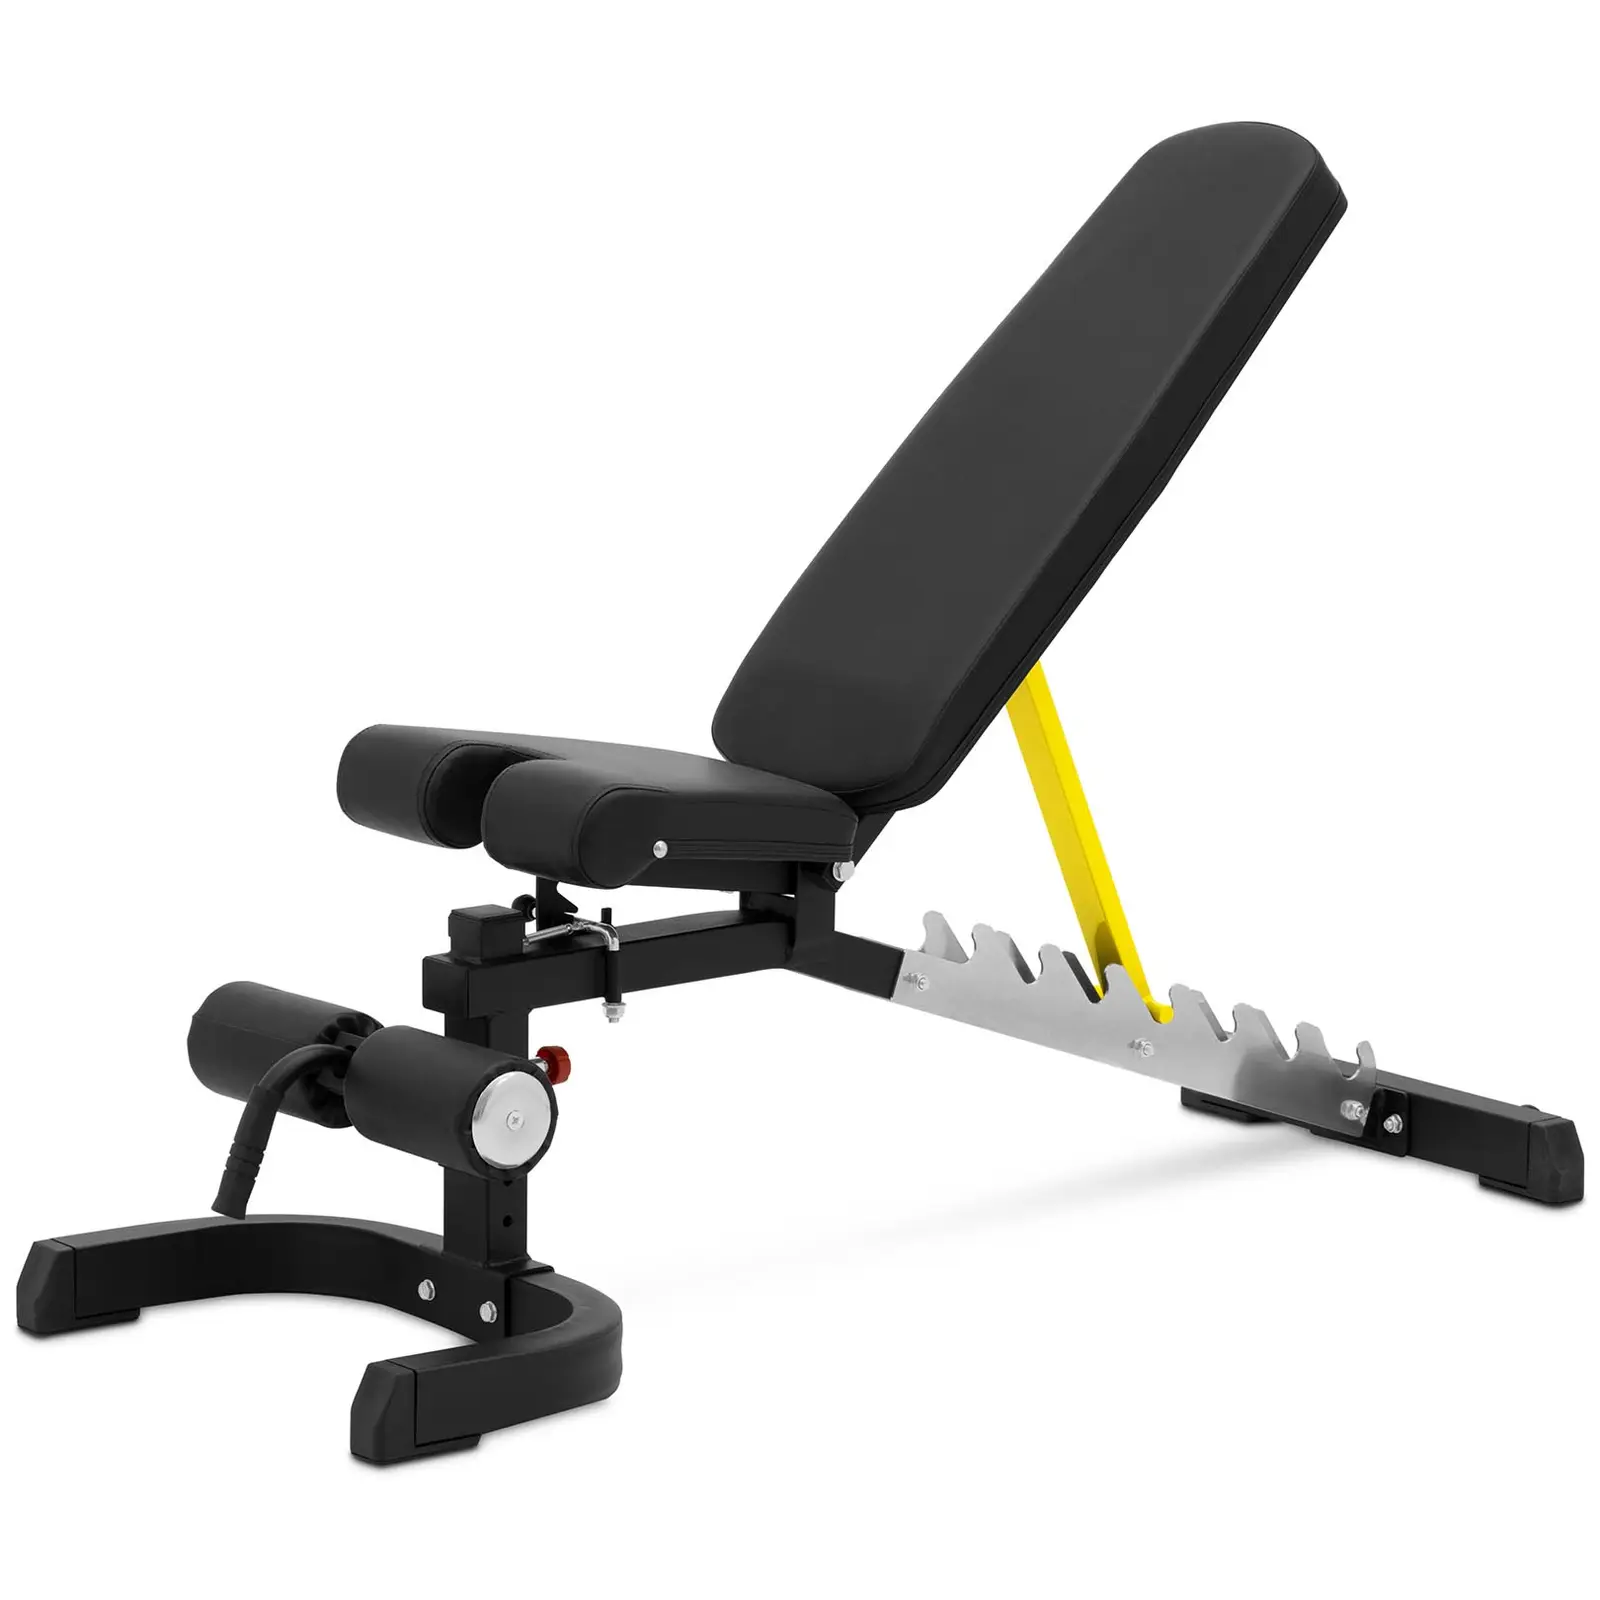 Incline Bench - up to 150 kg - adjustable - 80 - 180° inclination - foldable